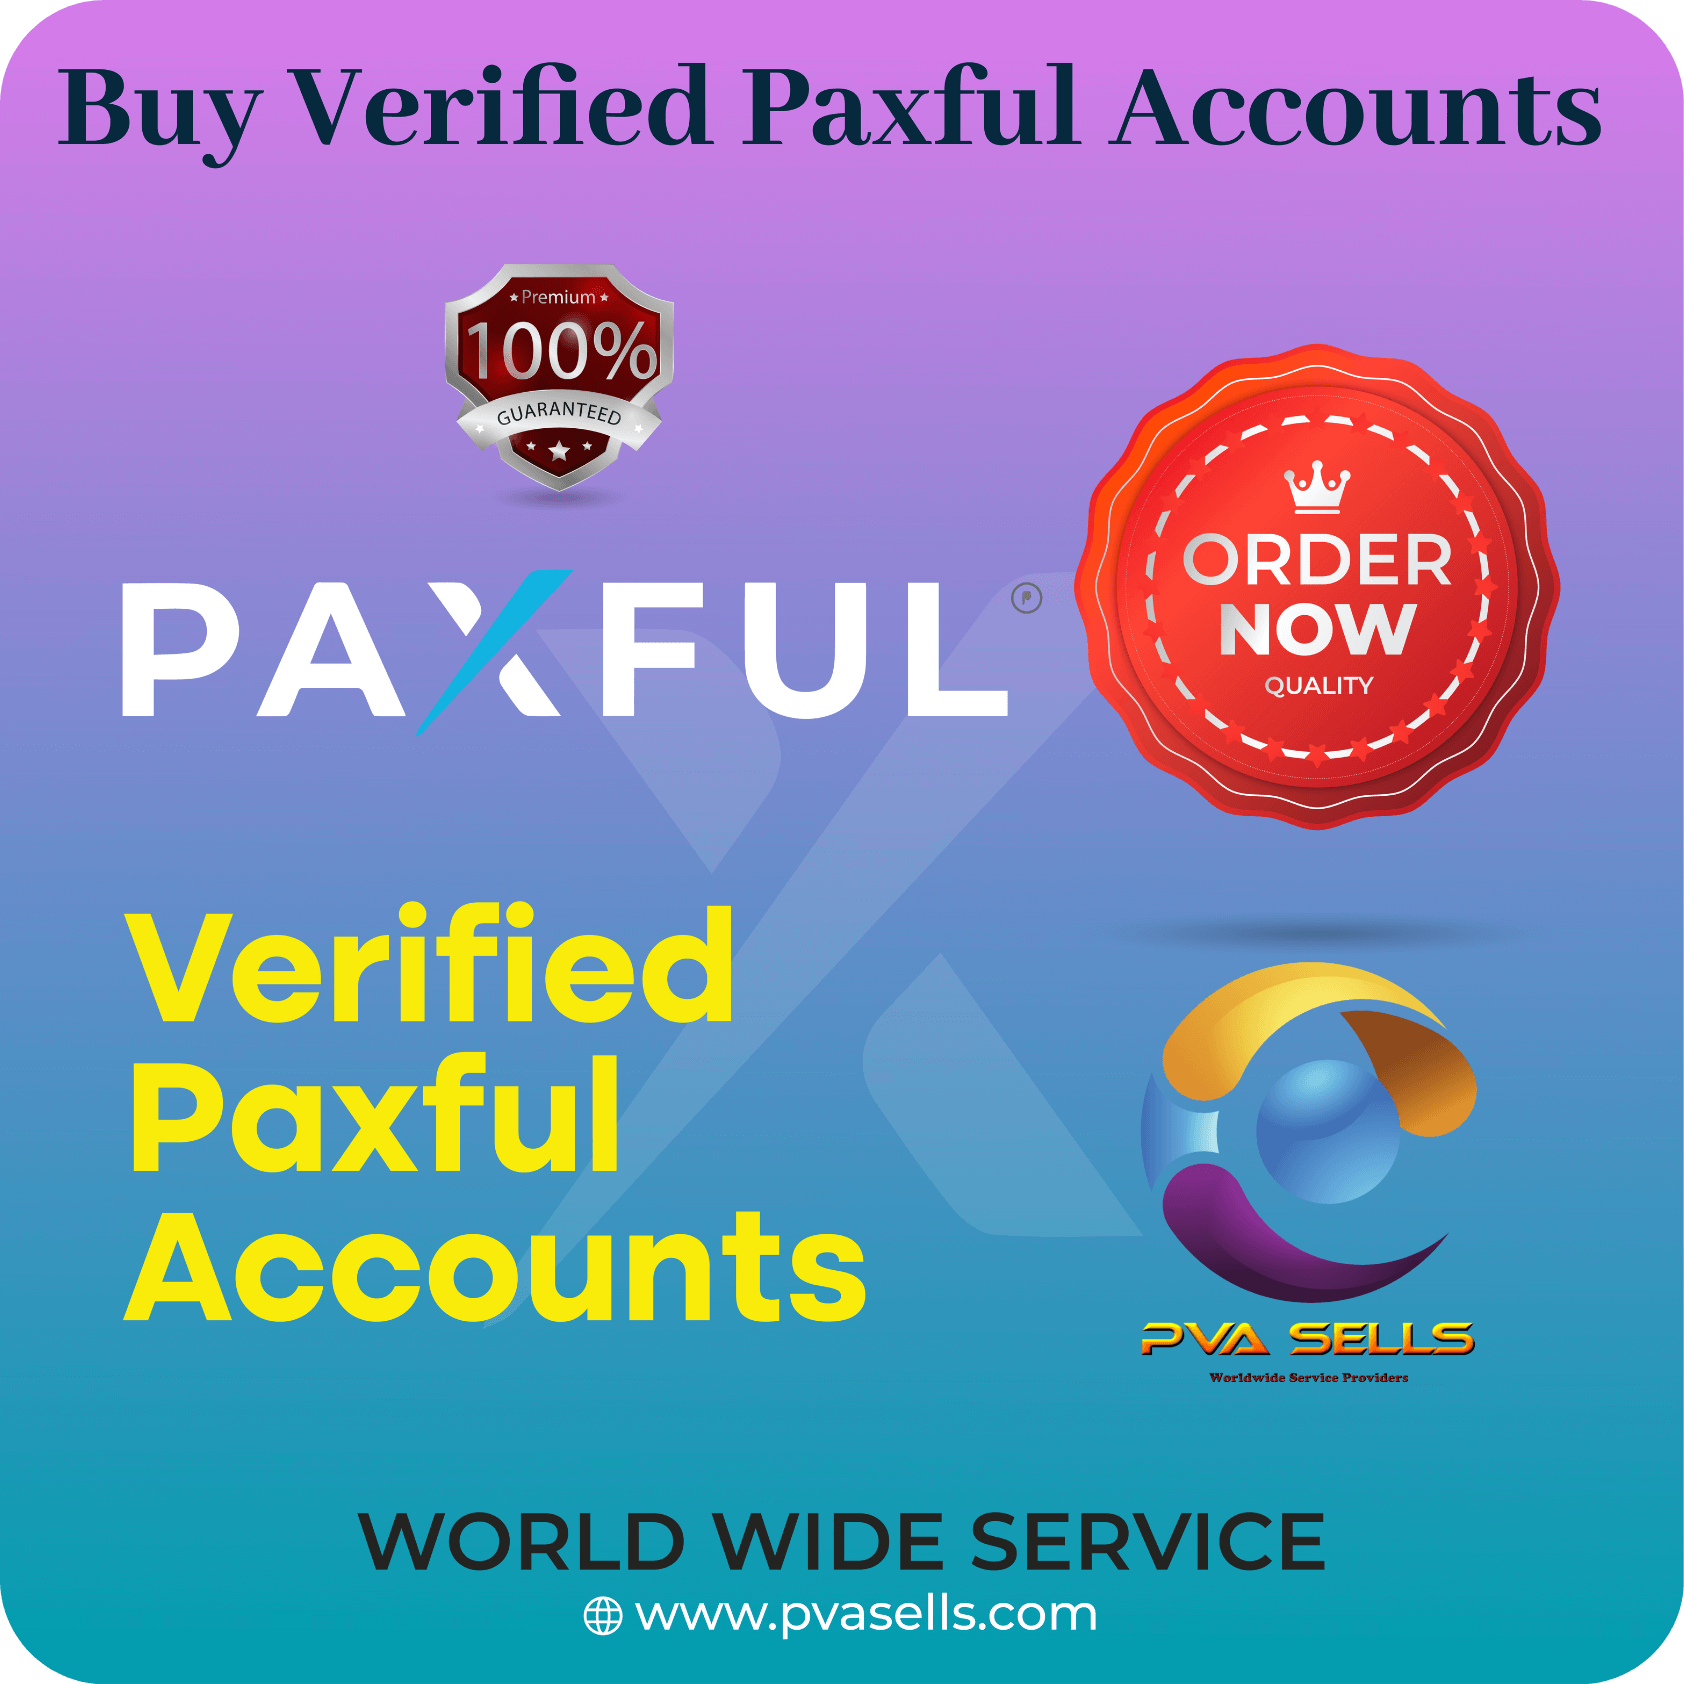 Buy Verified Paxful Accounts - 100% Secure And Best Quality Accounts...